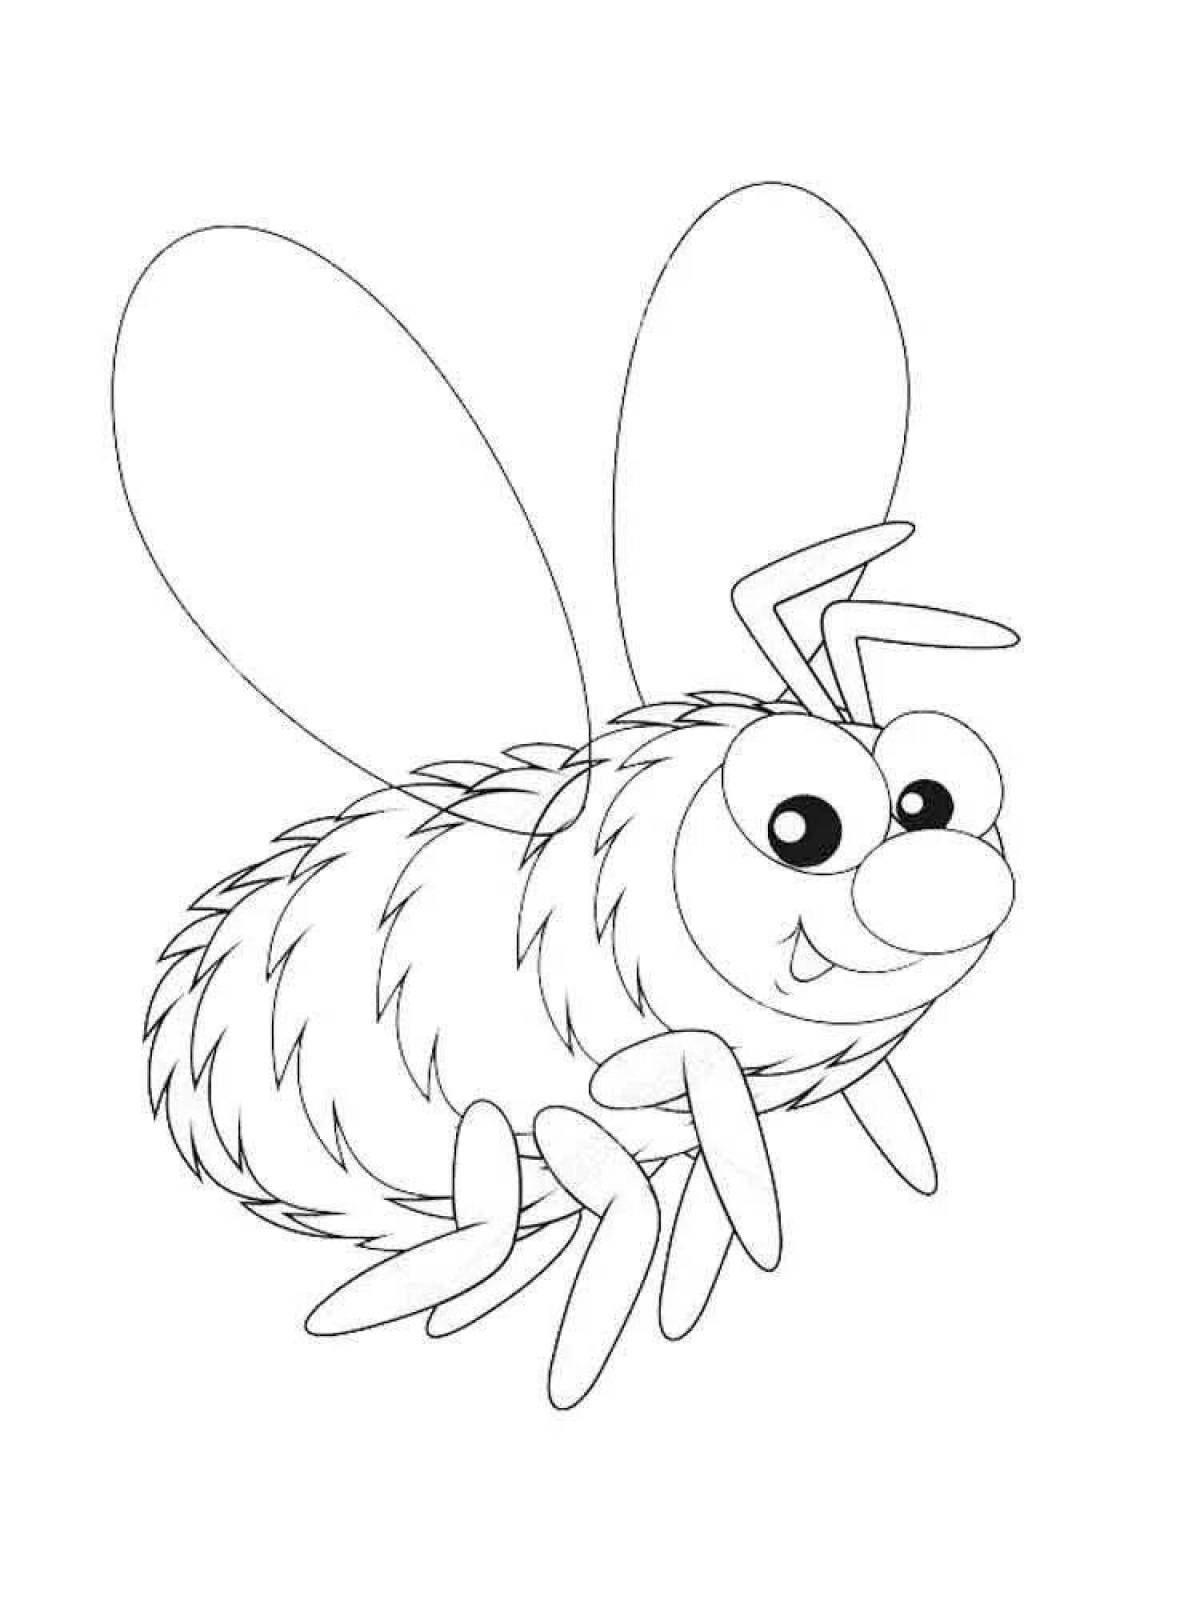 Coloring pages shemales for kids